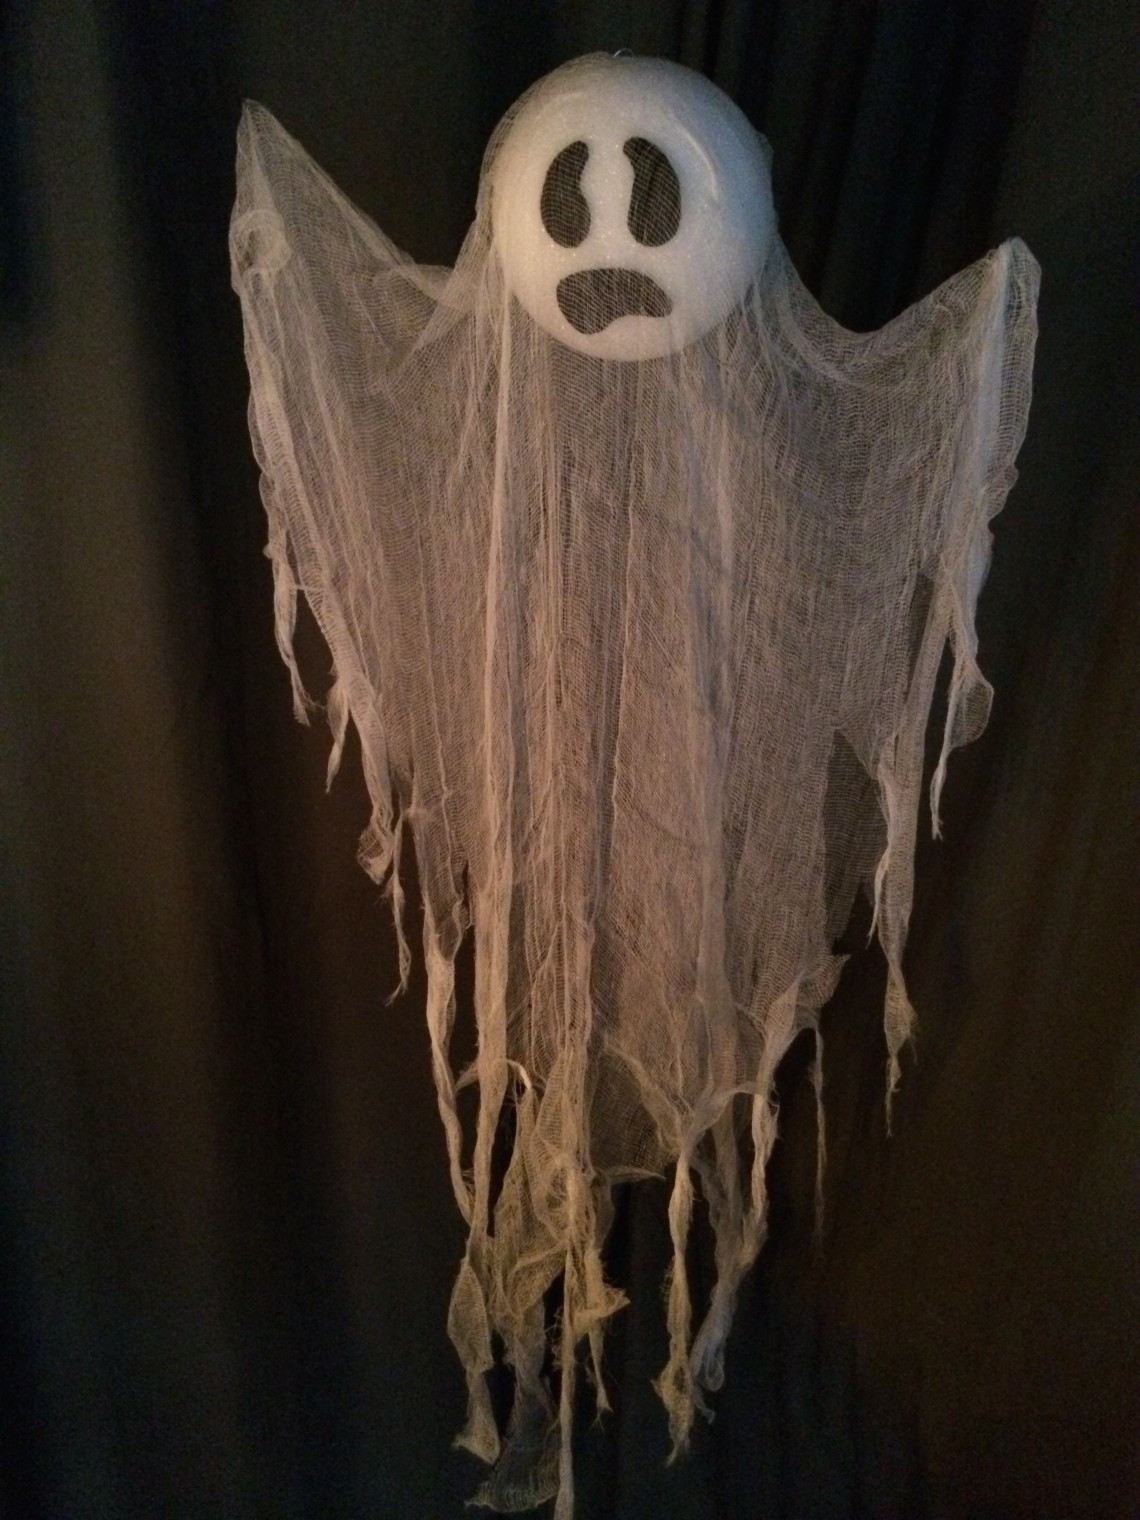 Spooky Halloween Decorations DIY
 5 Easy Creepy Yet Classy Halloween Party Decorations [on a